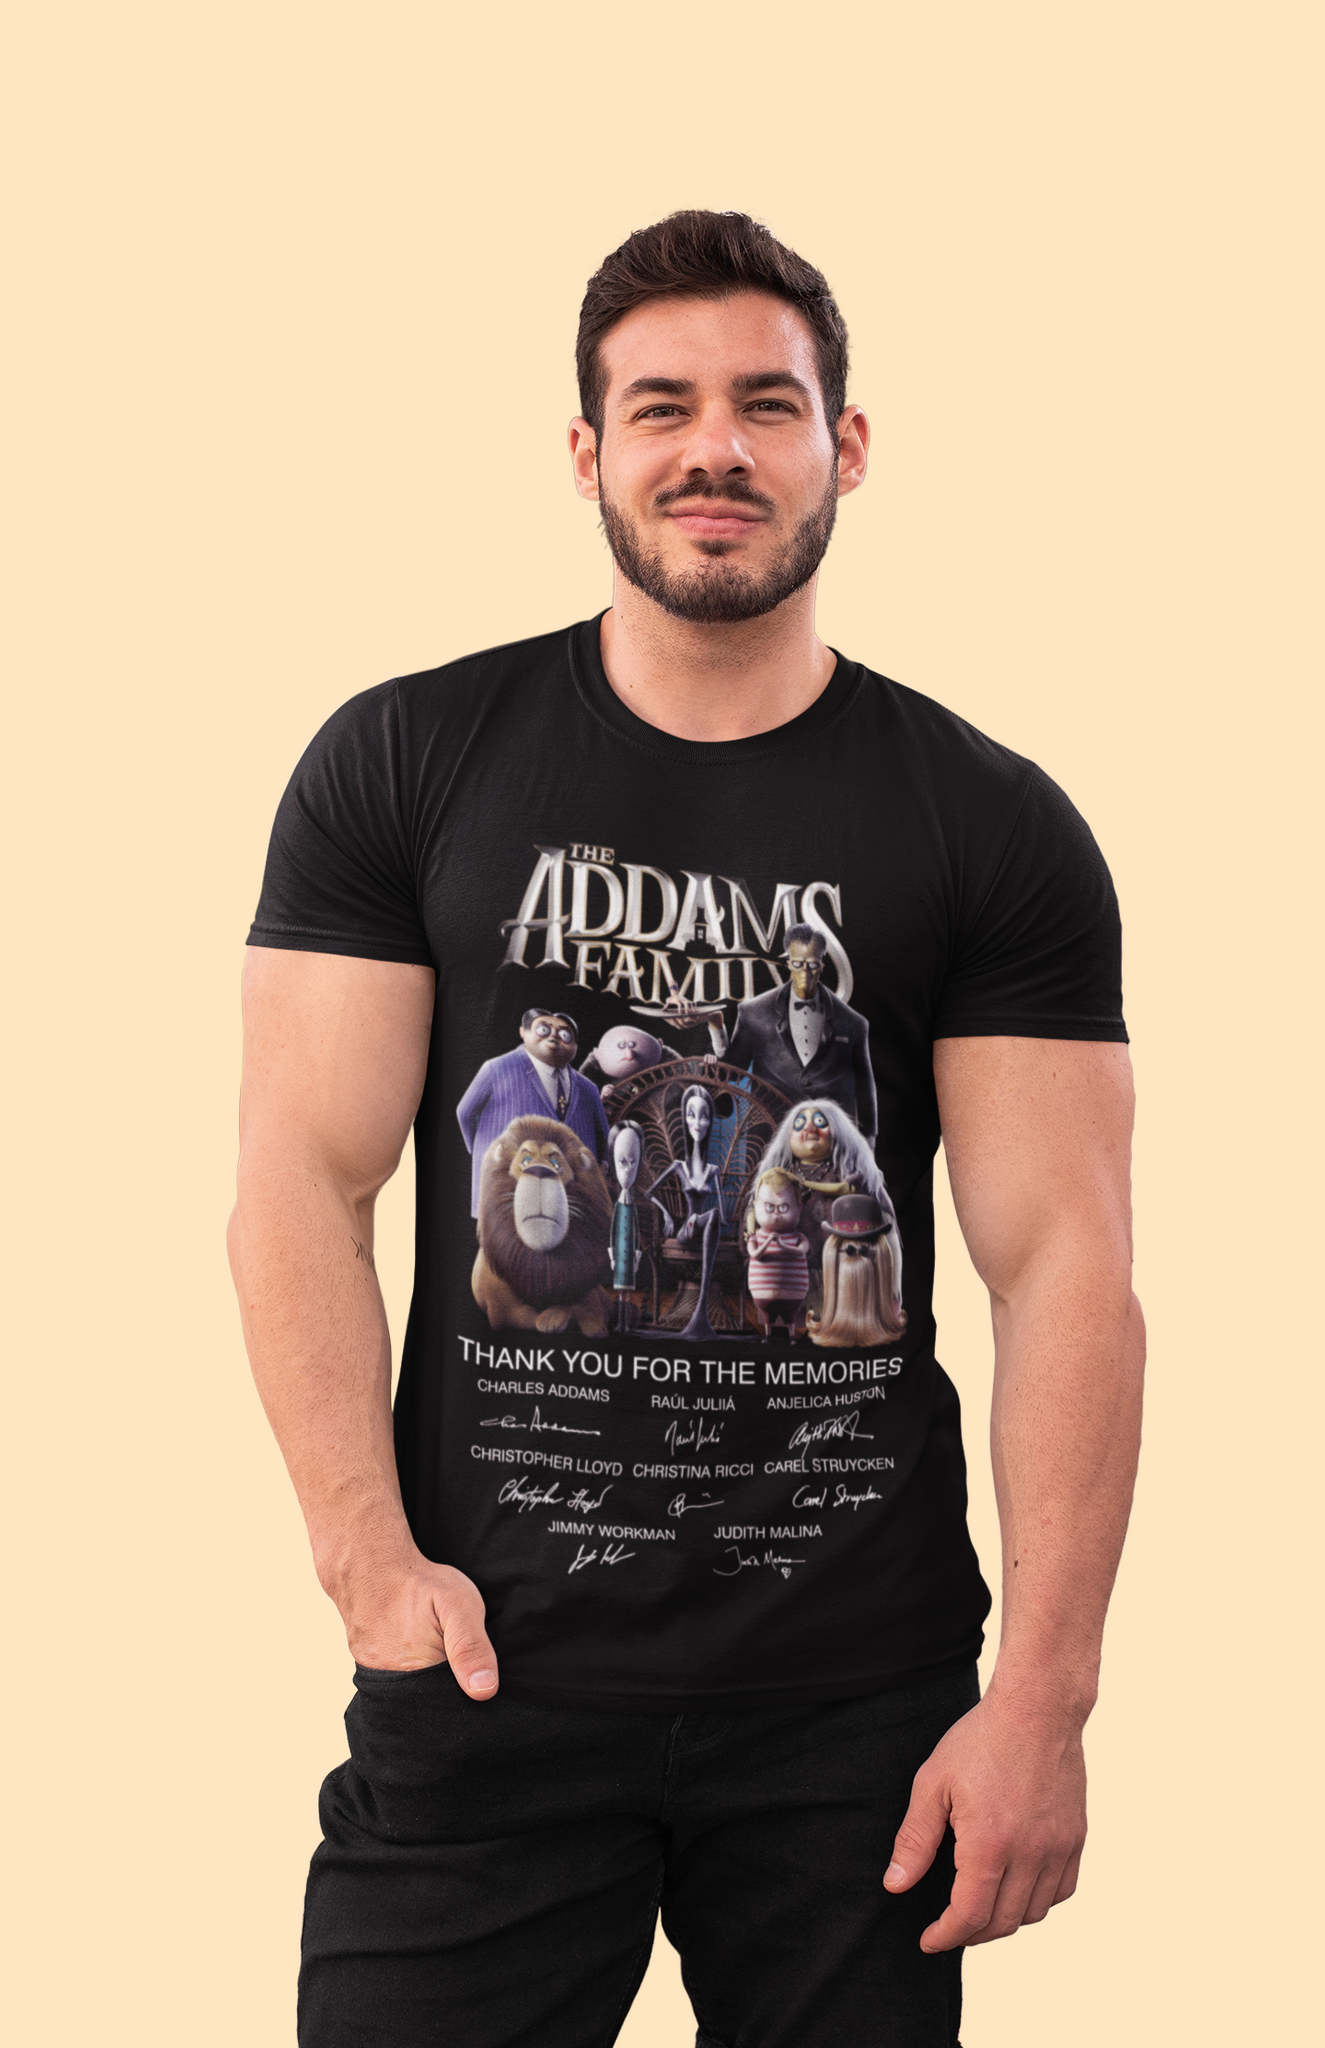 Addams Family T Shirt, Addams Family Characters Tshirt, Thank You For The Memories Shirt, Halloween Gifts